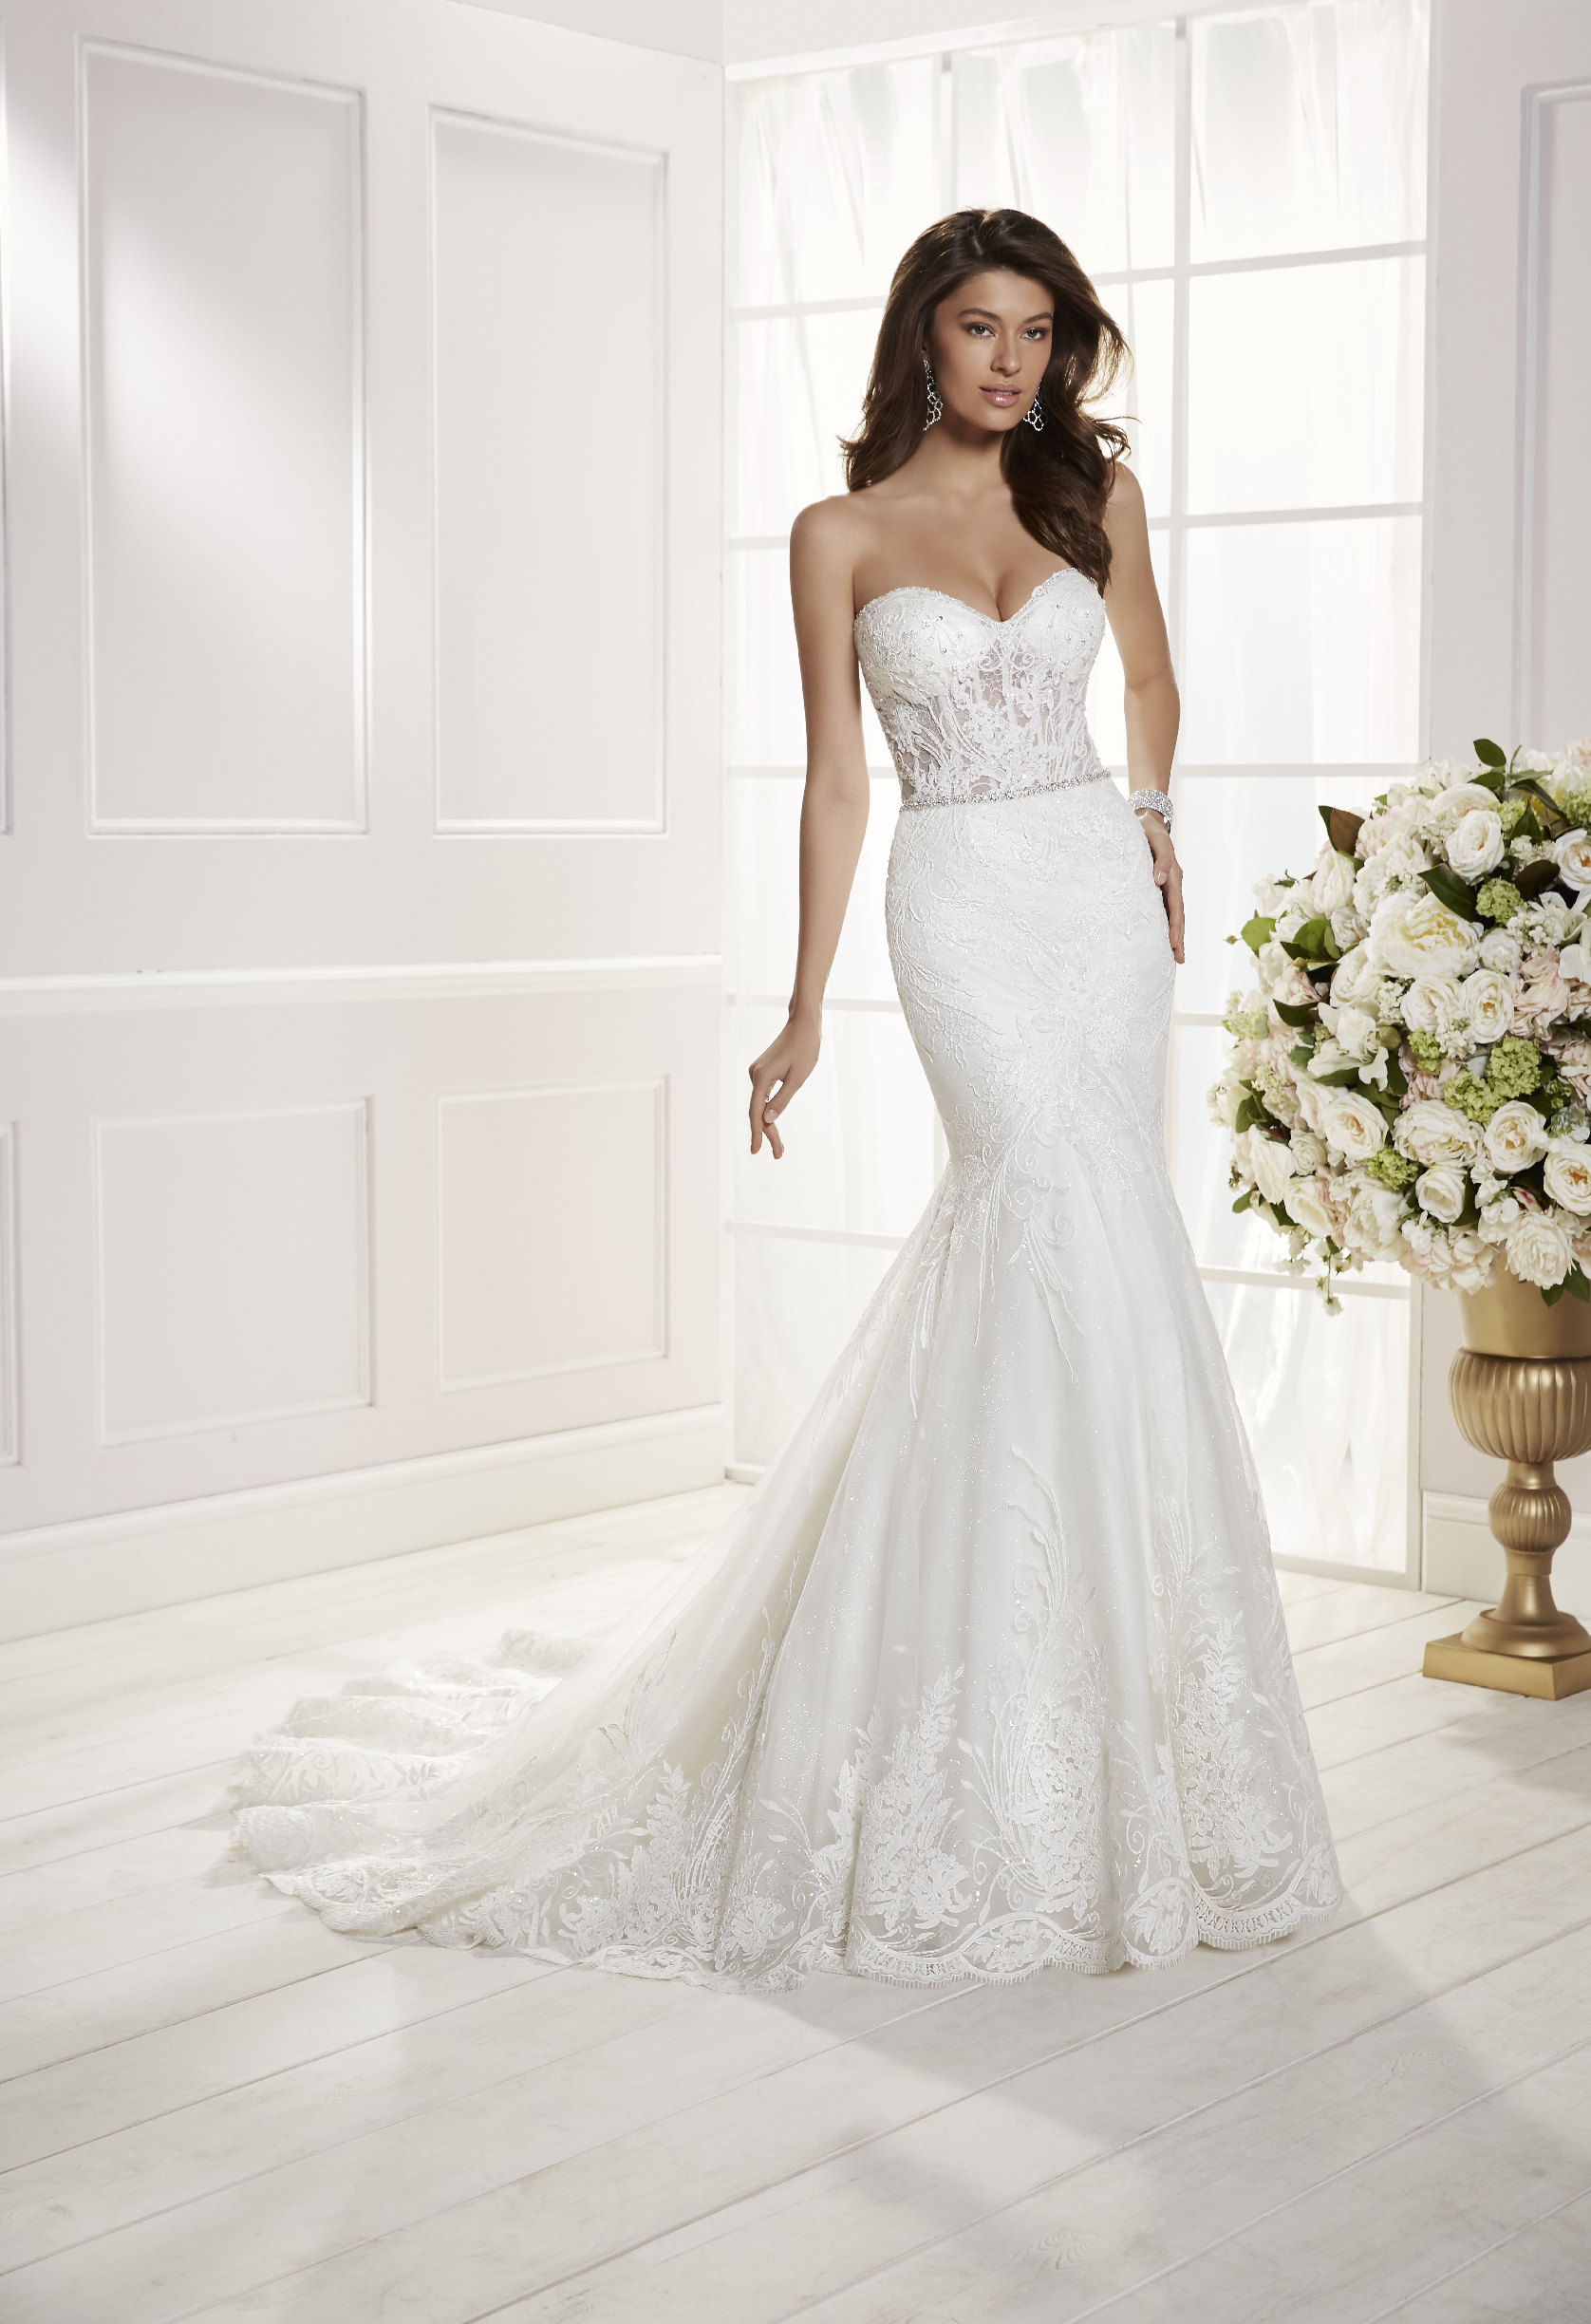 Model wearing Ronald Joyce wedding dress style Chiara, 69461, an on-trend strapless lace fishtail wedding dress with lingerie-inspired bodice